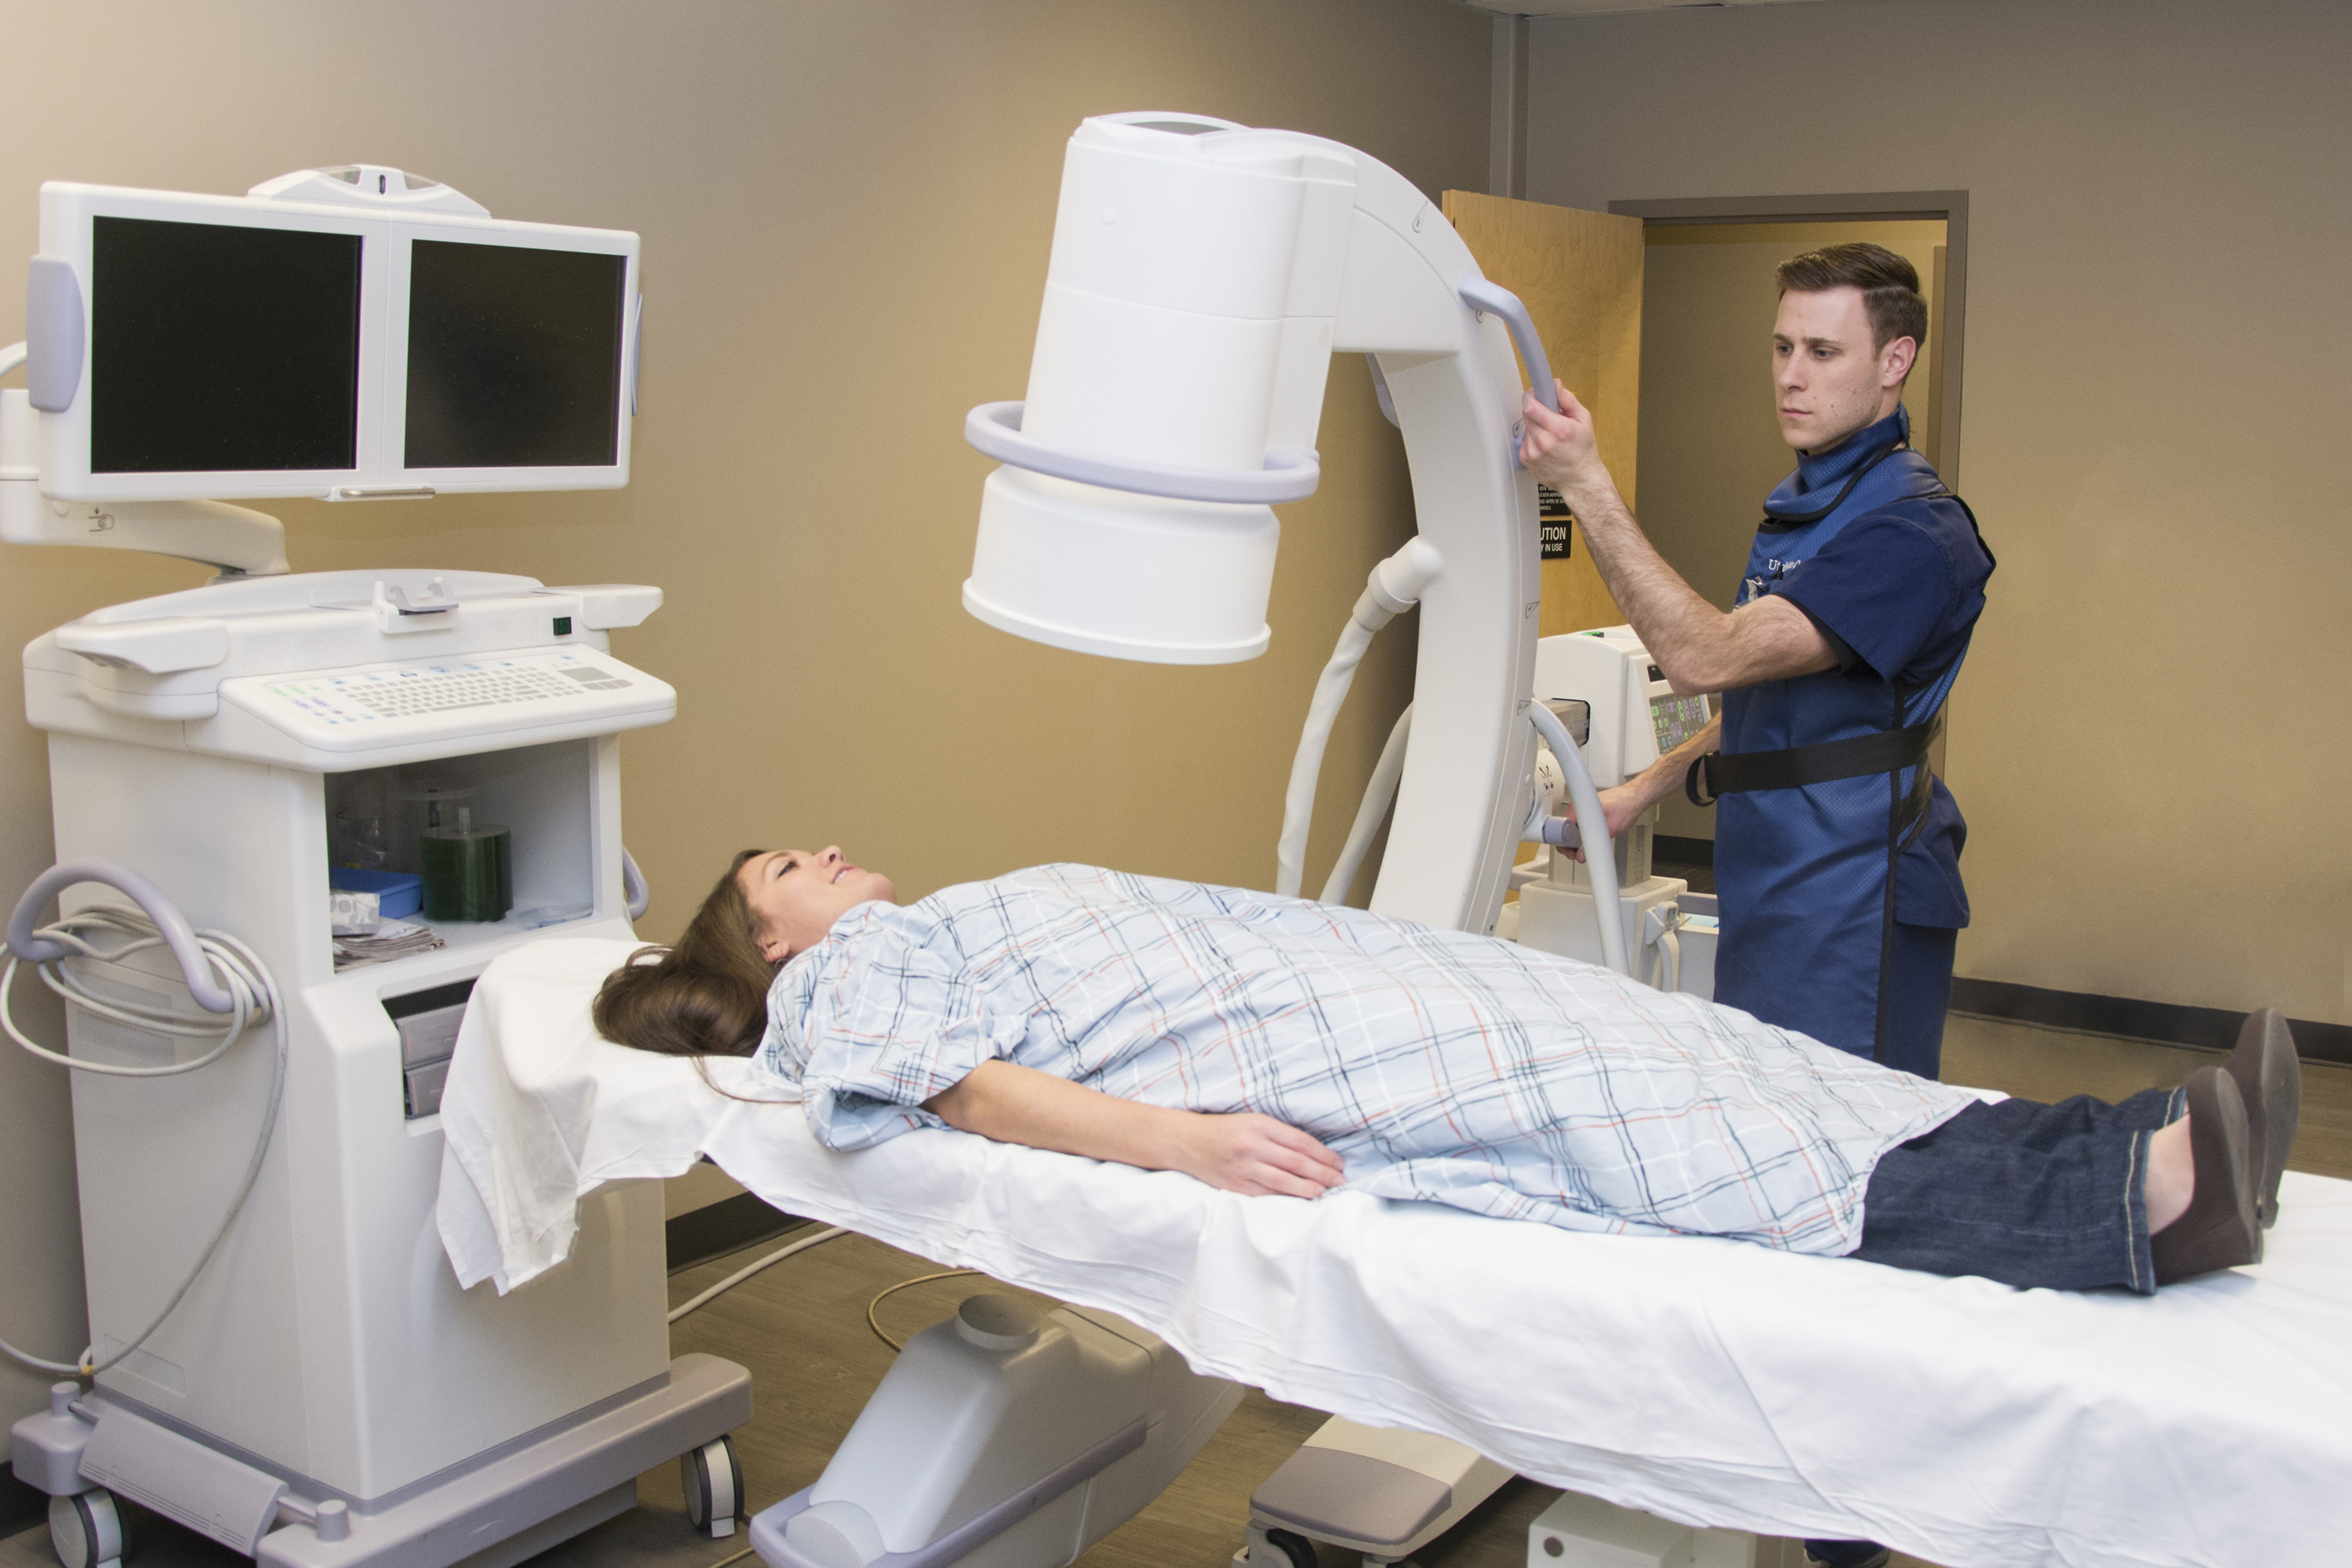 A patient preparing a patient for an X-ray. | Source: Shutterstock